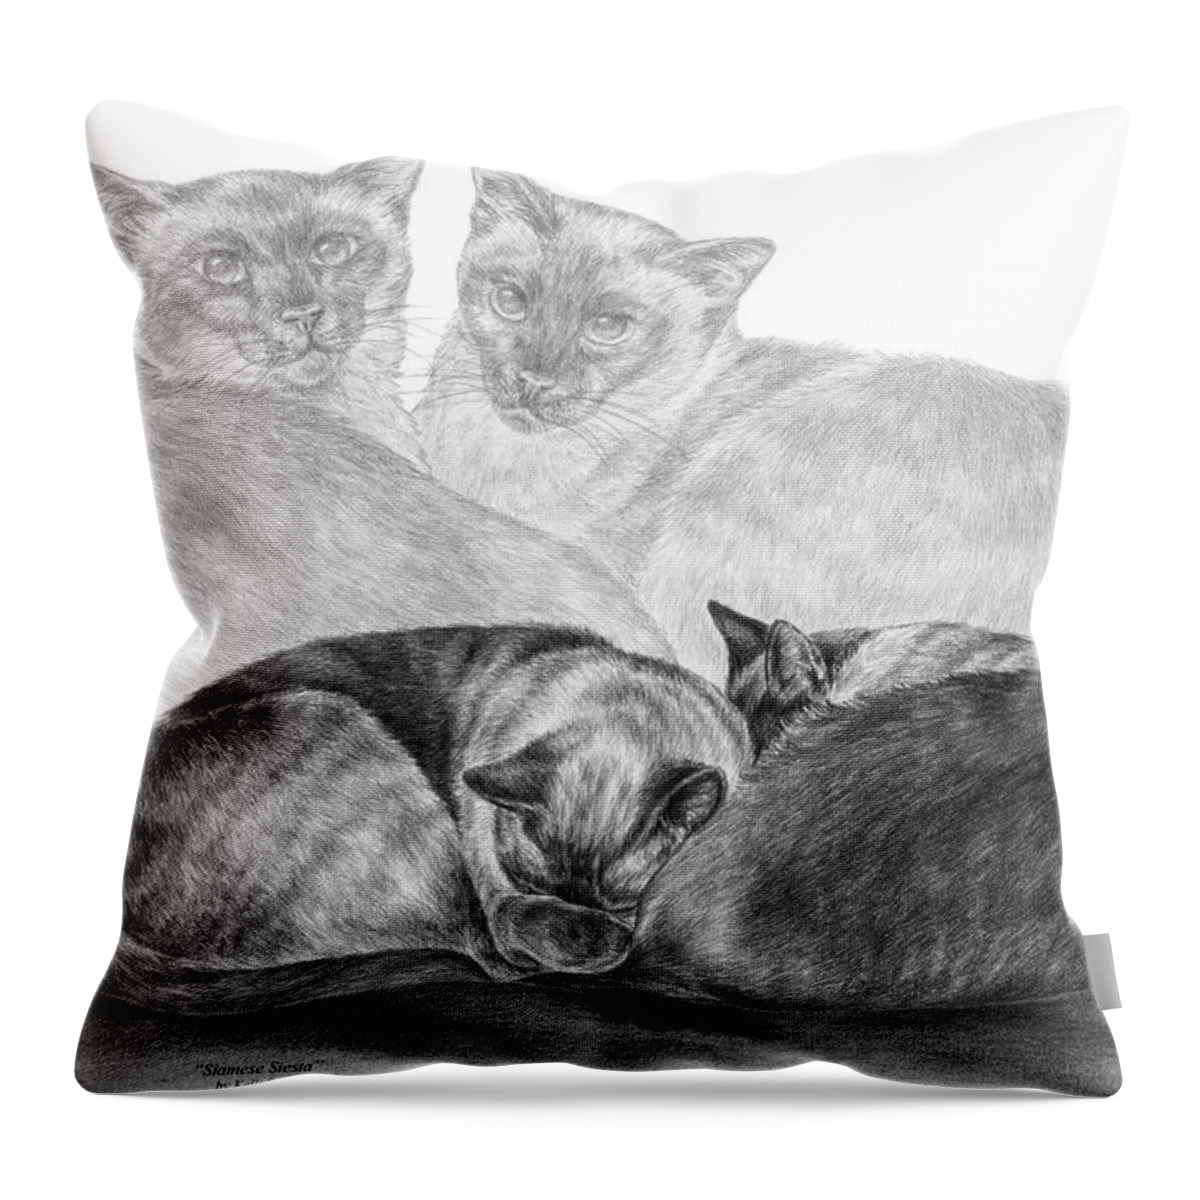 Siamese Throw Pillow featuring the drawing Siamese Cat Siesta by Kelli Swan